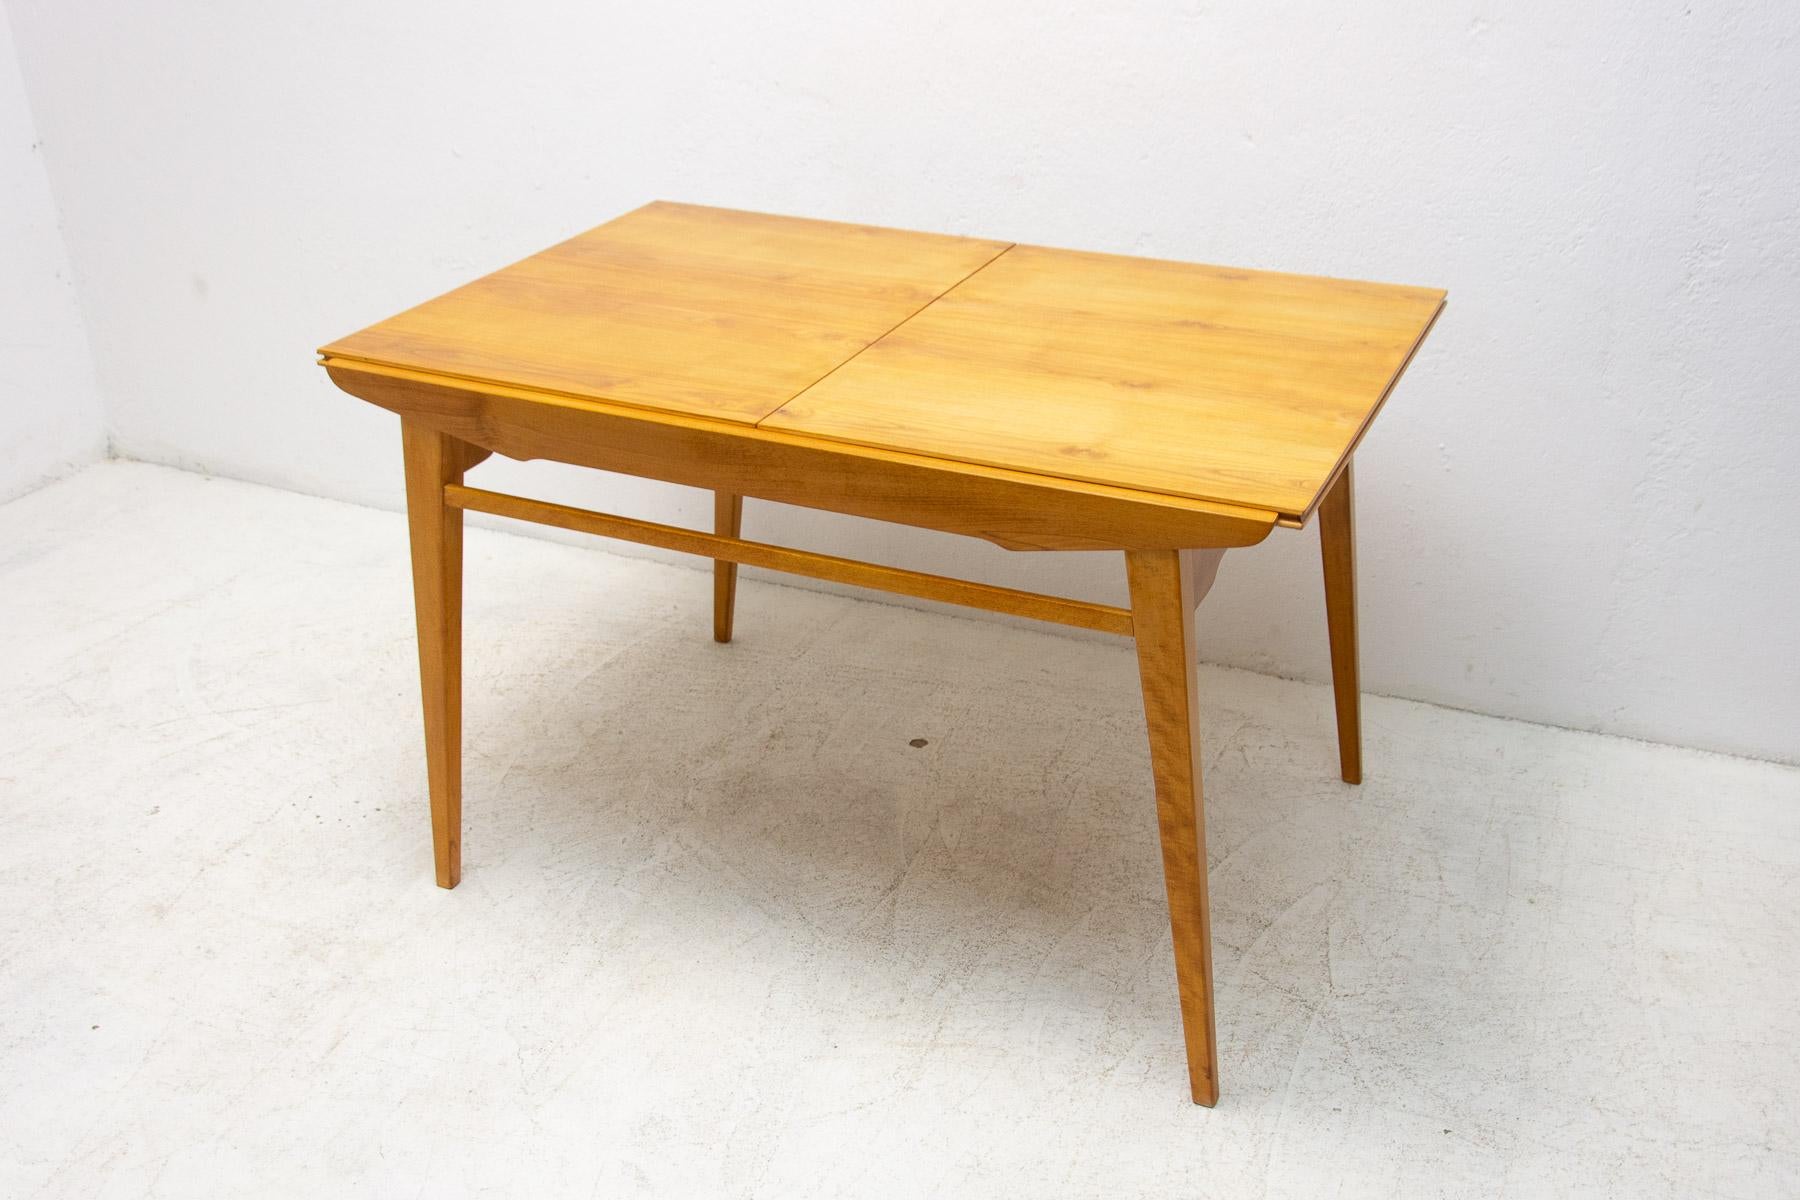 This adjustable dining table was designed by Bohumil Landsman and made by Jitona Company in the former Czechoslovakia in the 1970´s. It´s made of ash and beech wood. The lenght is adjustable from 108 cm to 140 cm. The table is in very good